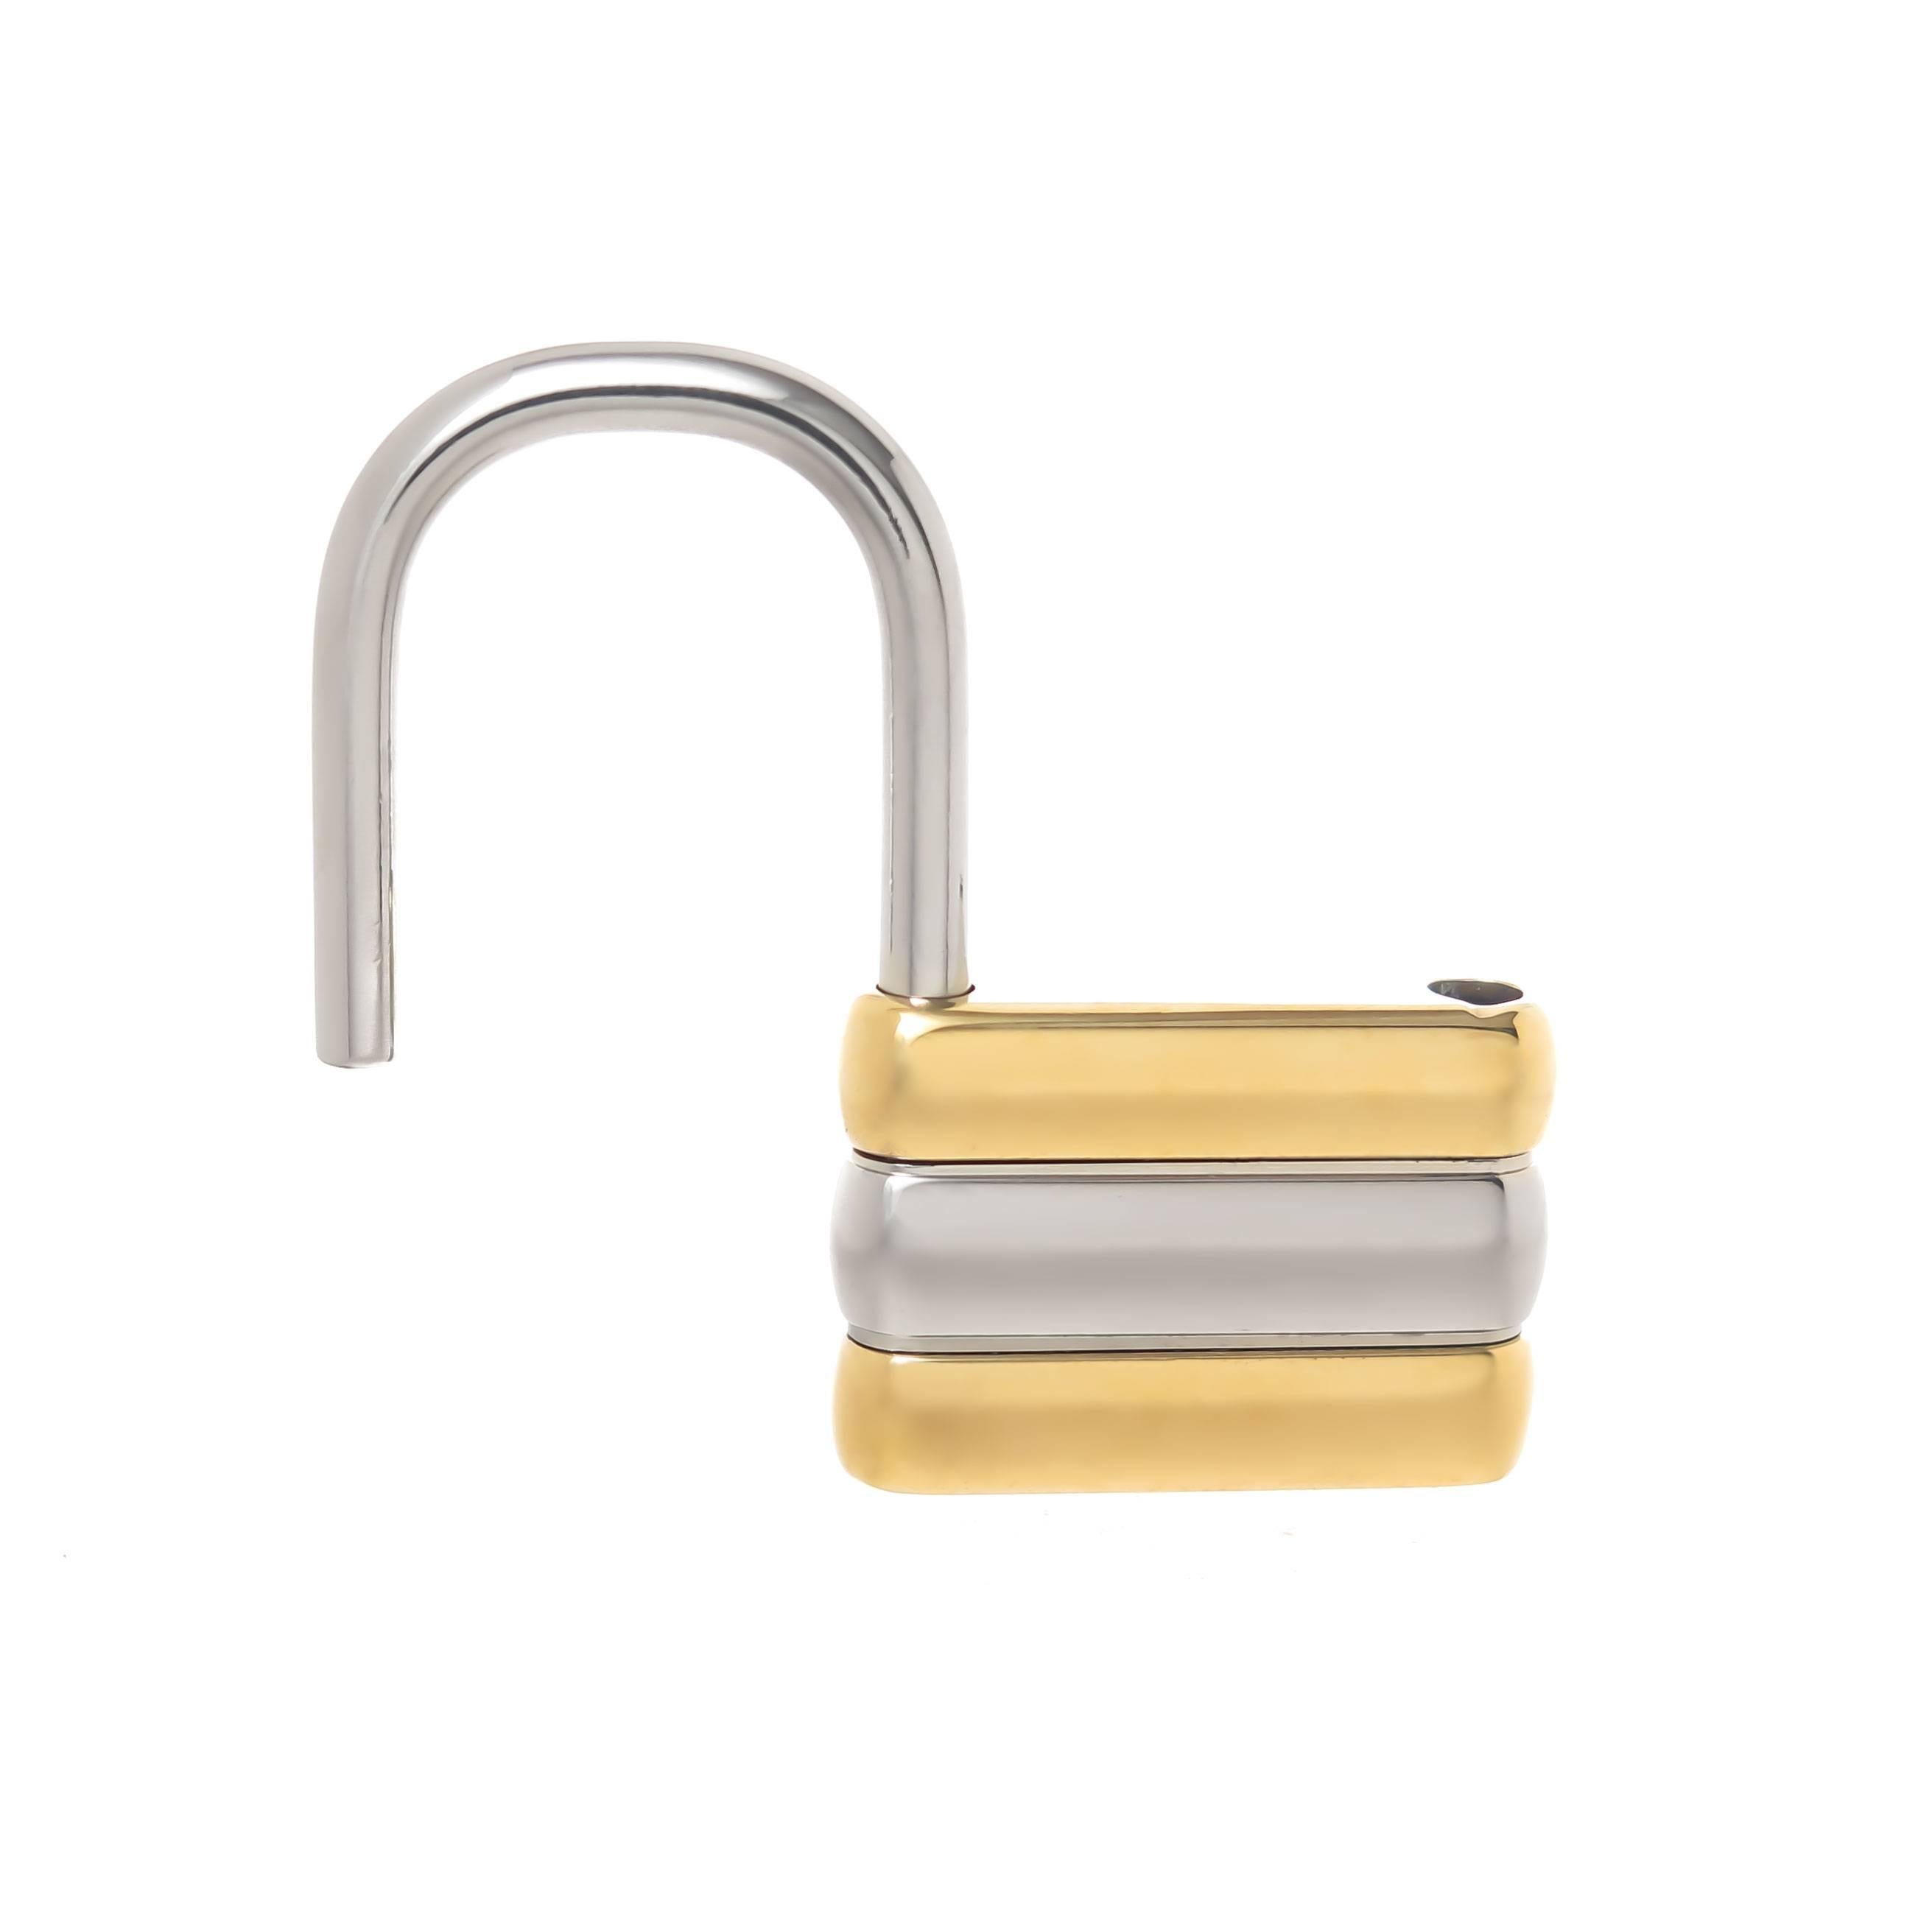 Circa 1970s Cartier Lock form Key Holder, measuring 2 inch  X 1 1/4 inch, Bright polish white metal and Gold plate.